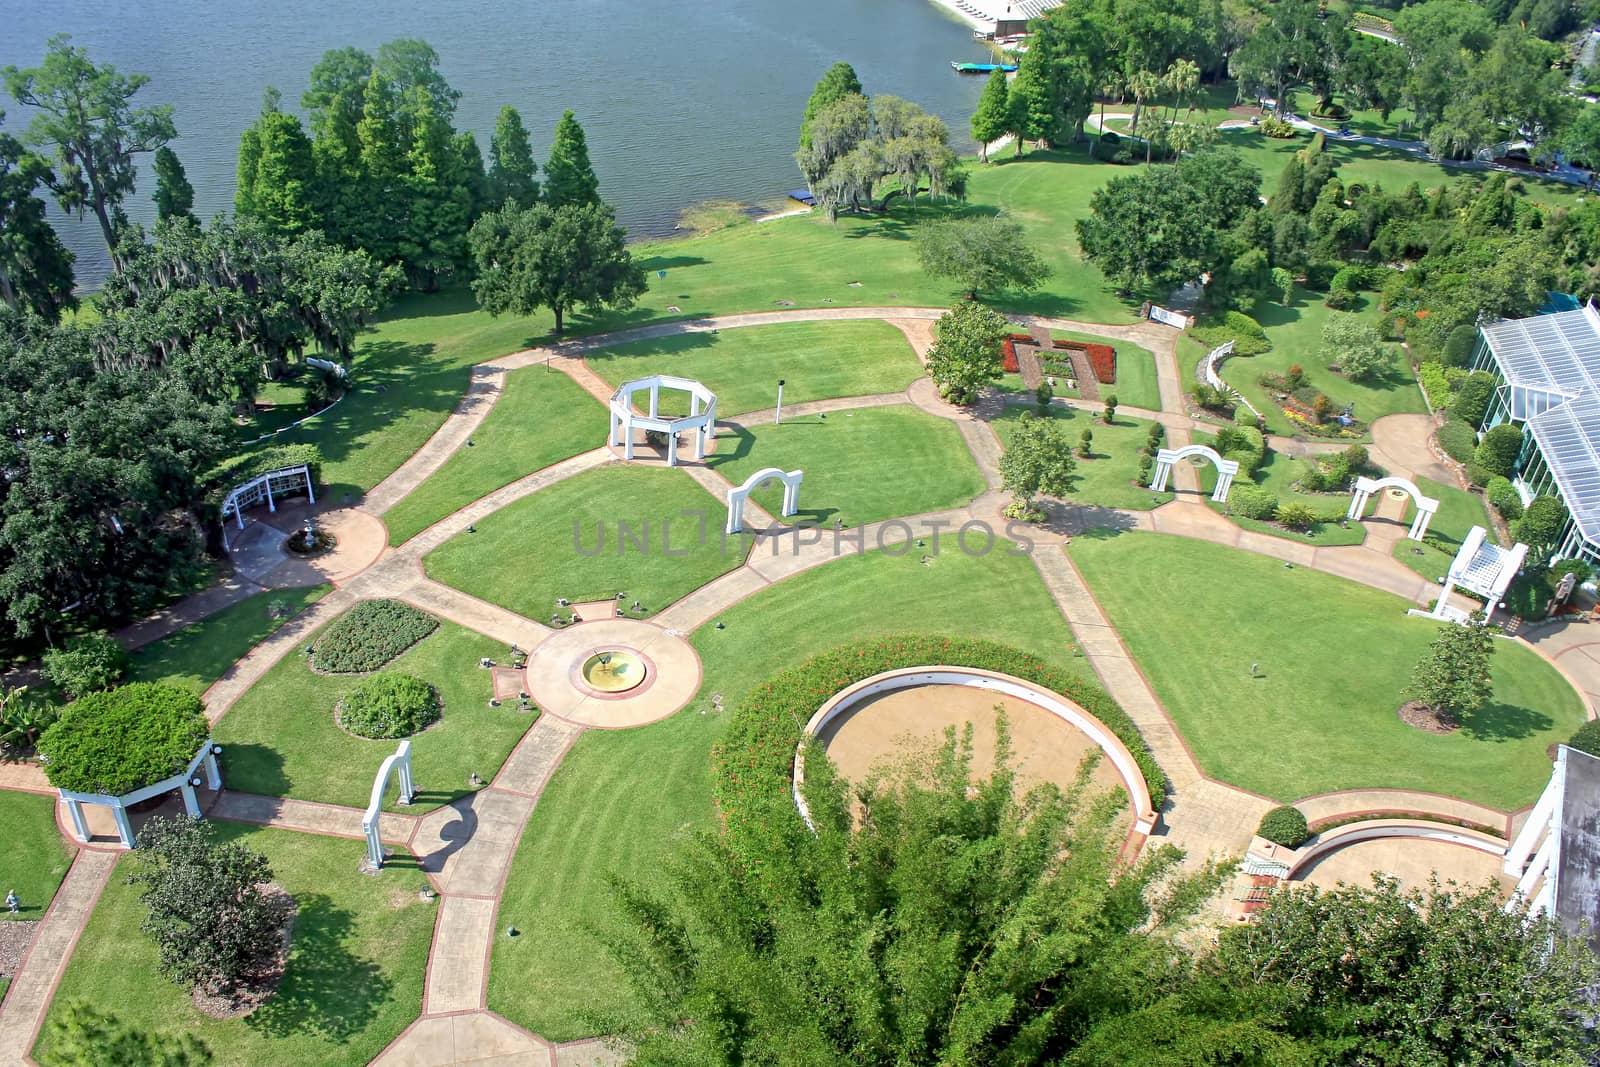 A view of gardens from up high